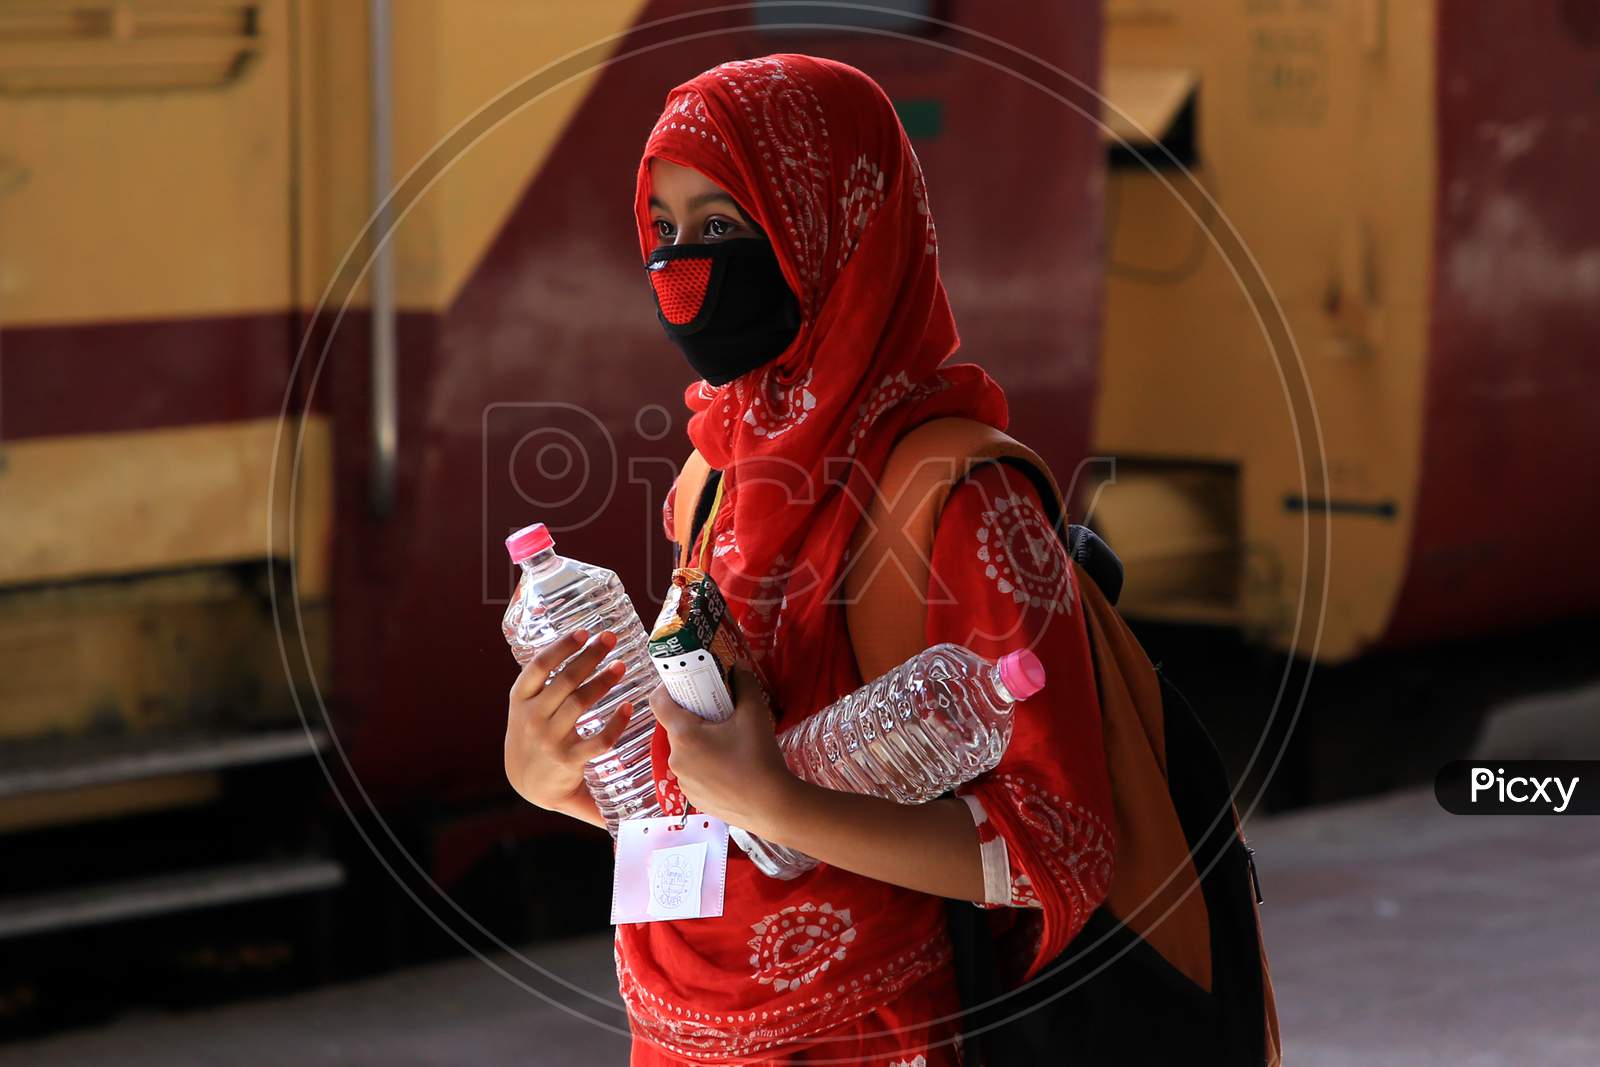 Stranded Migrant Going Pashchim Bangal State By Special Train During A Government-Imposed Nationwide Lockdown As A Preventive Measure Against The Covid-19 Coronavirus In Ajmer, Rajasthan, India On 04 May 2020.